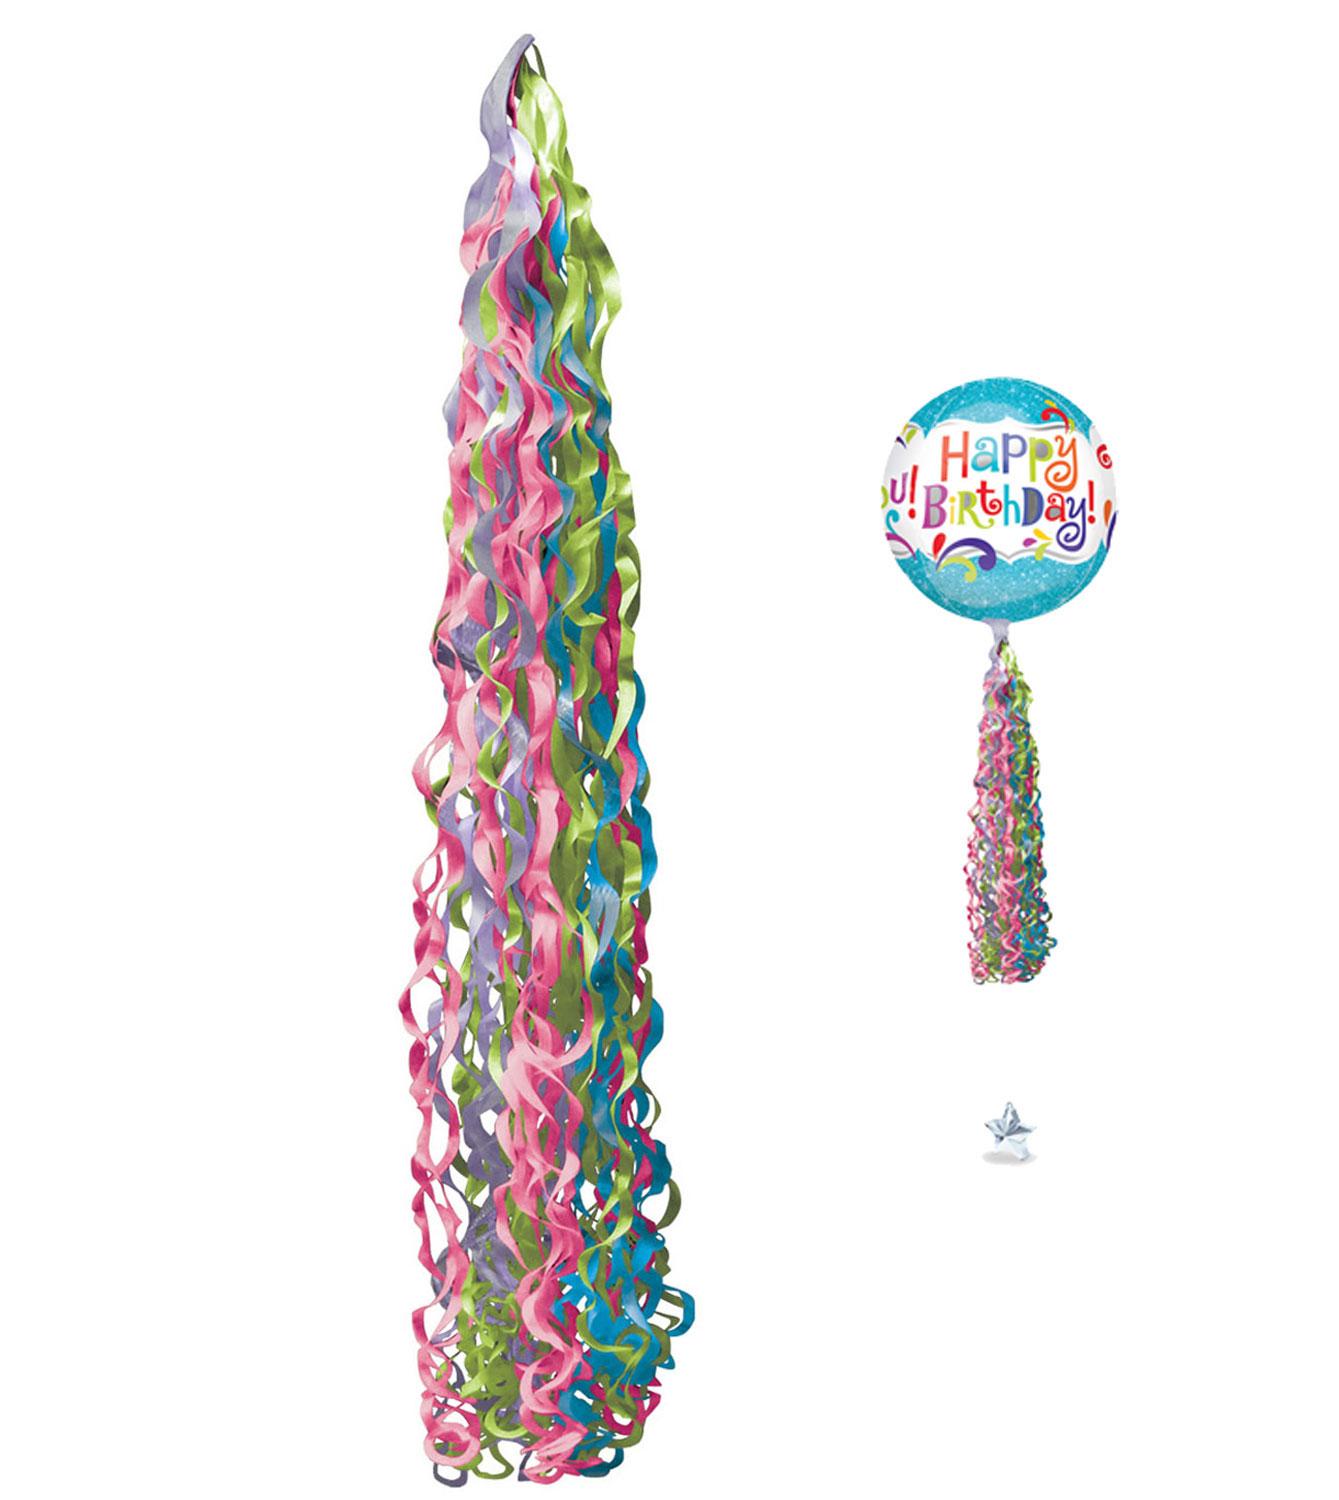 Twirlz Medium Jewel Tone Balloon Tail by Amscan 82311-01 available here at Karnival Costumes online party shop